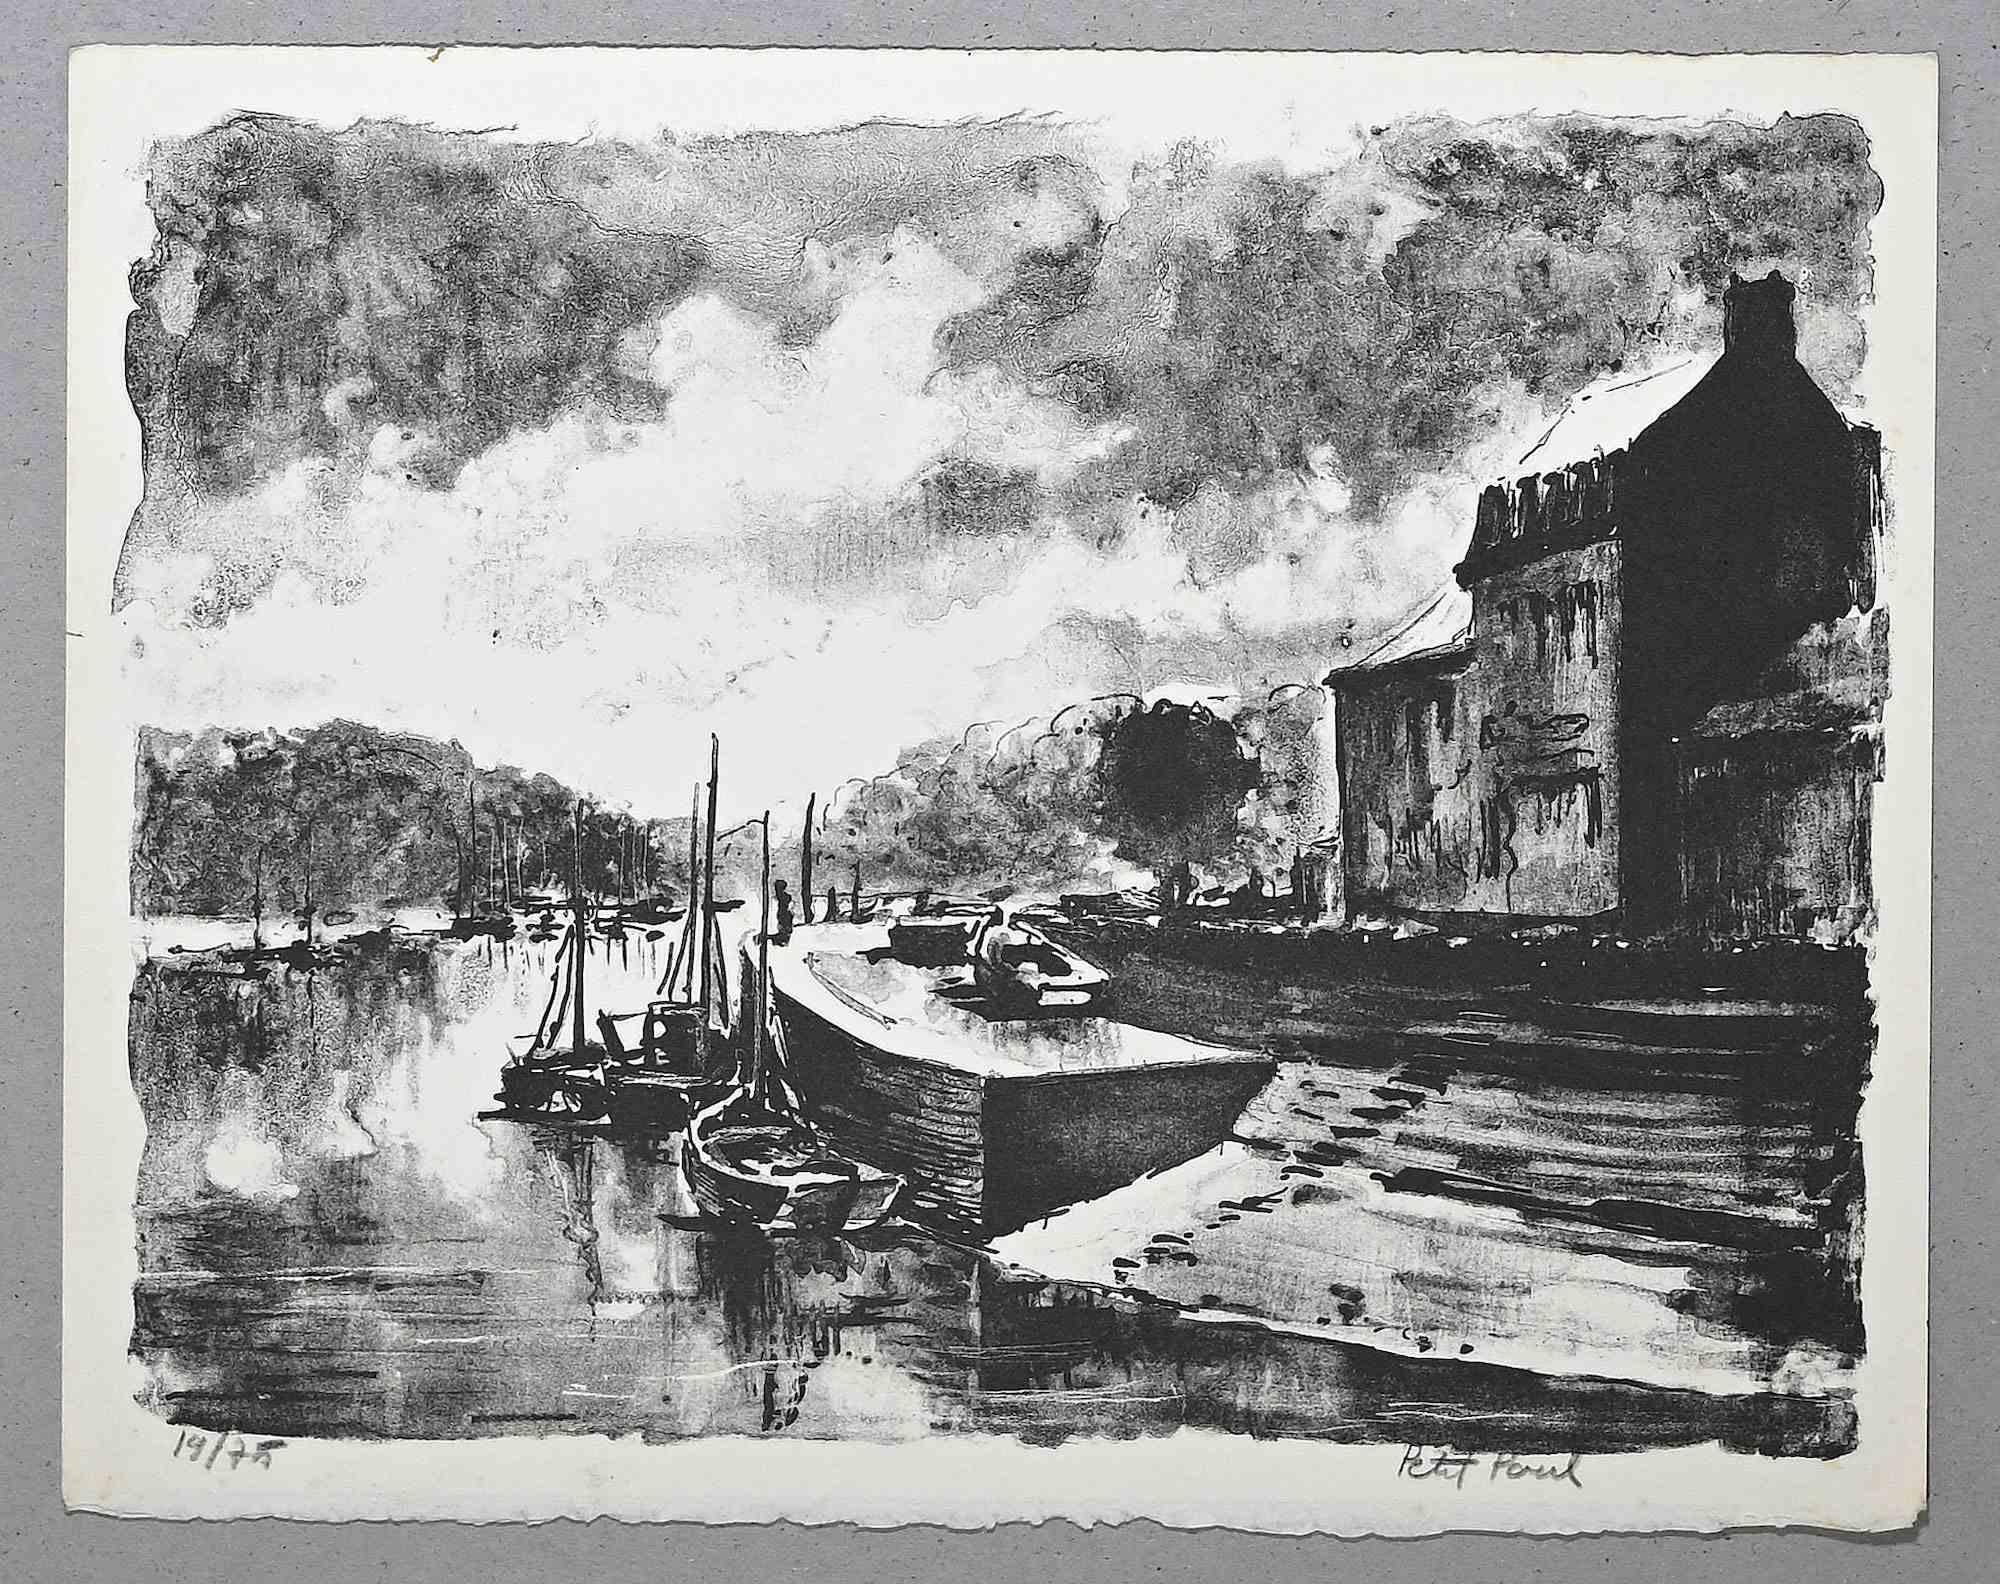 Harbor View is a lithograph realized by Paul Petit in the Mid-20th Century.

Hand-signed.

Numbered, 19/75

The artwork is depicted through confident strokes in a well-balanced composition.